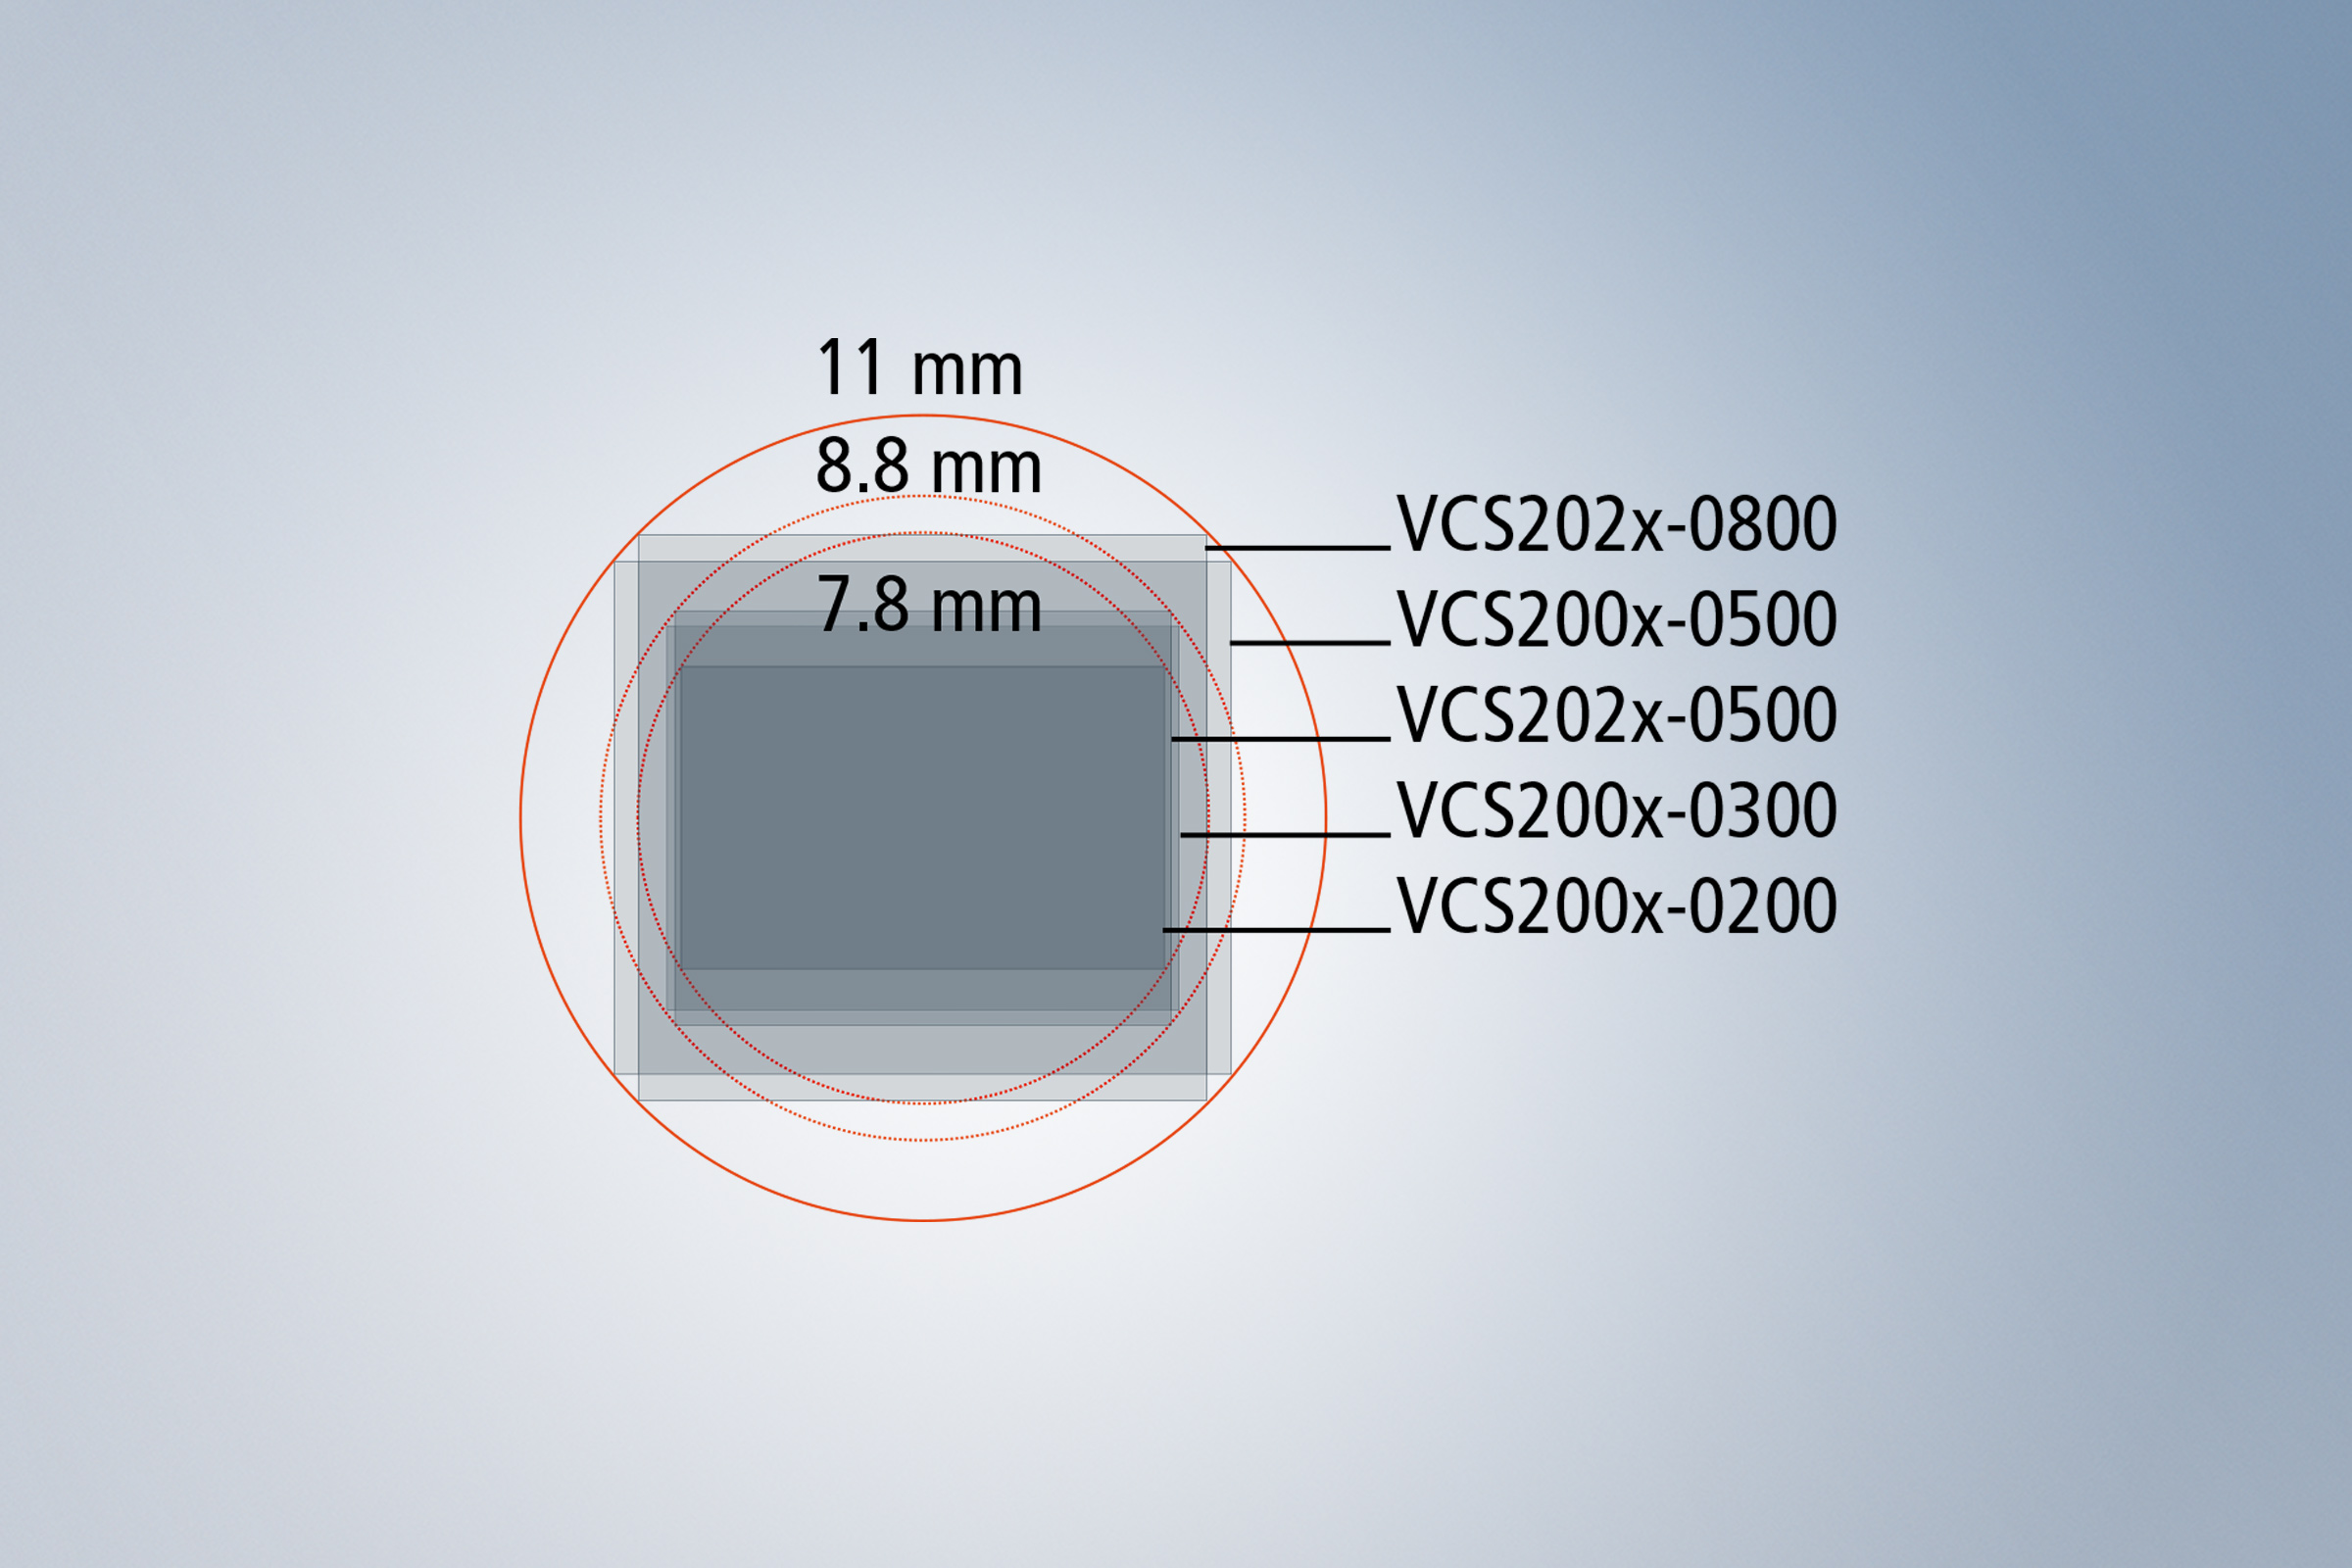 Resolutions of up to 8 megapixels can be achieved with the VOS2000 and the current image sensors. 